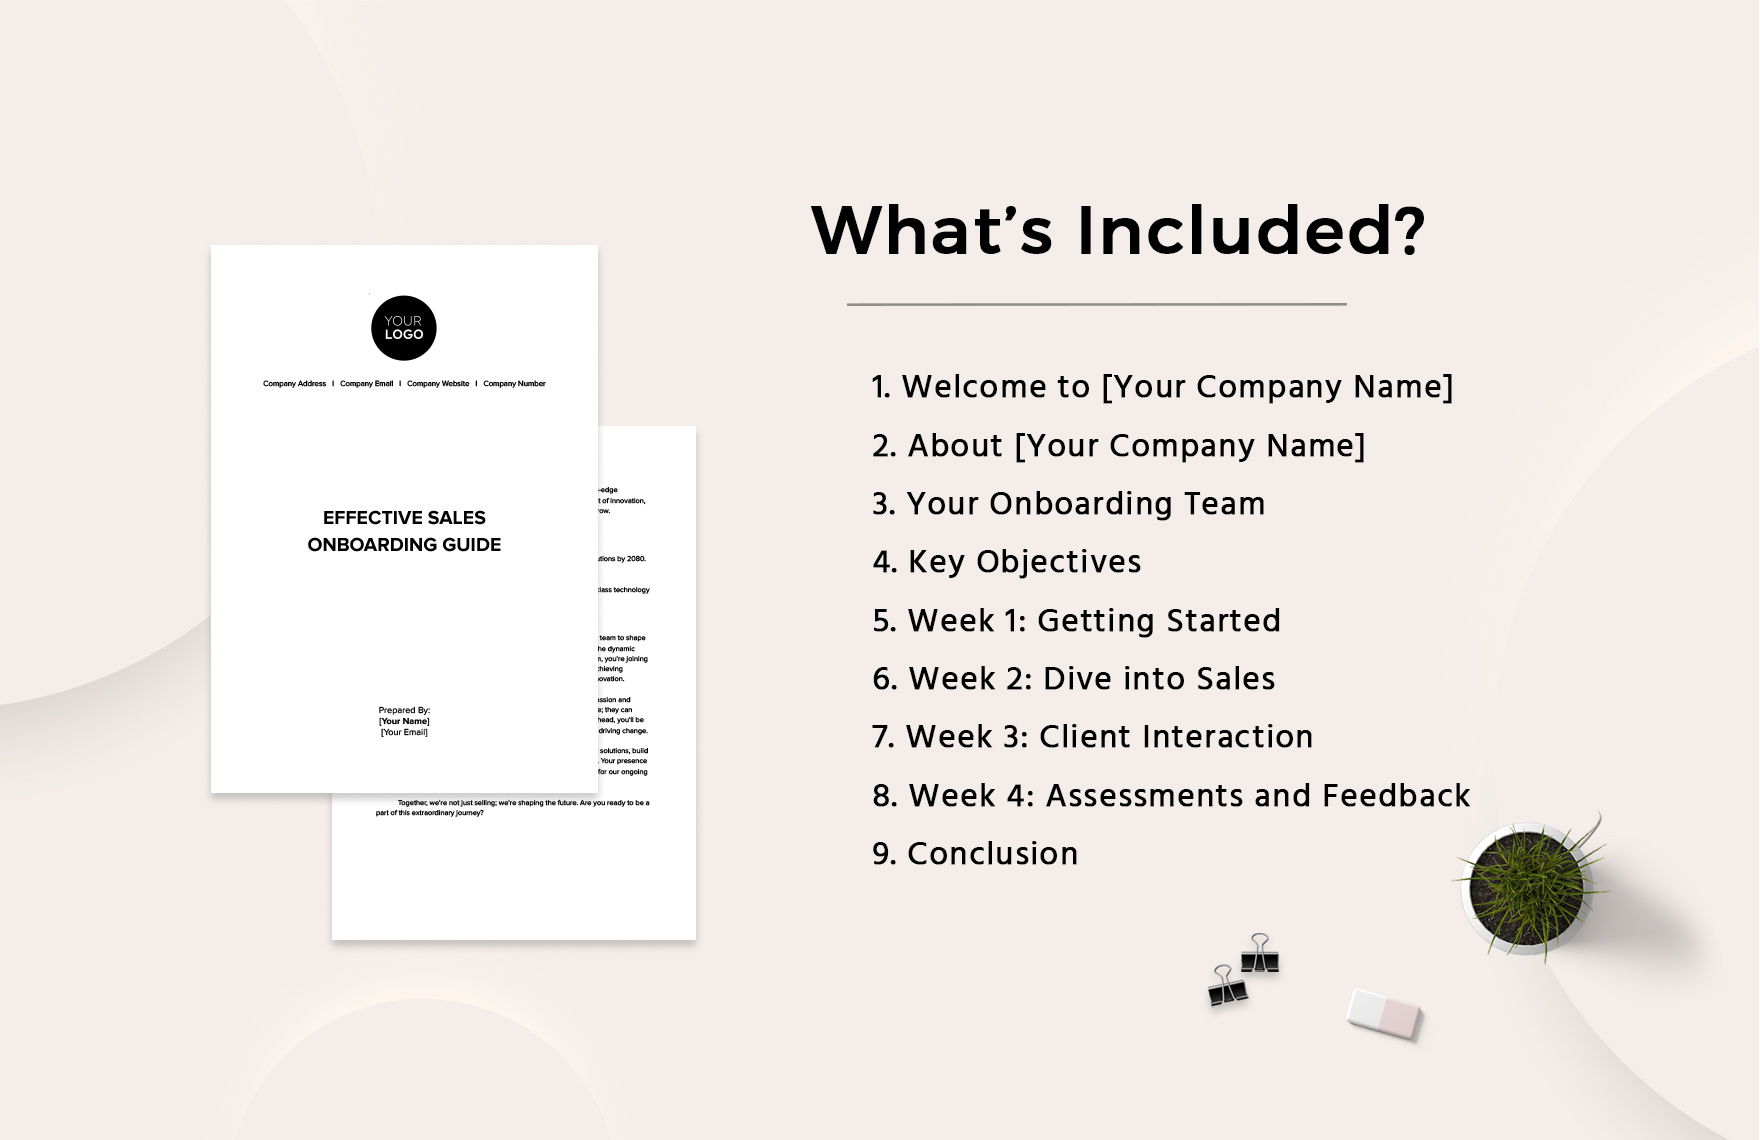 Effective Sales Onboarding Guide Template